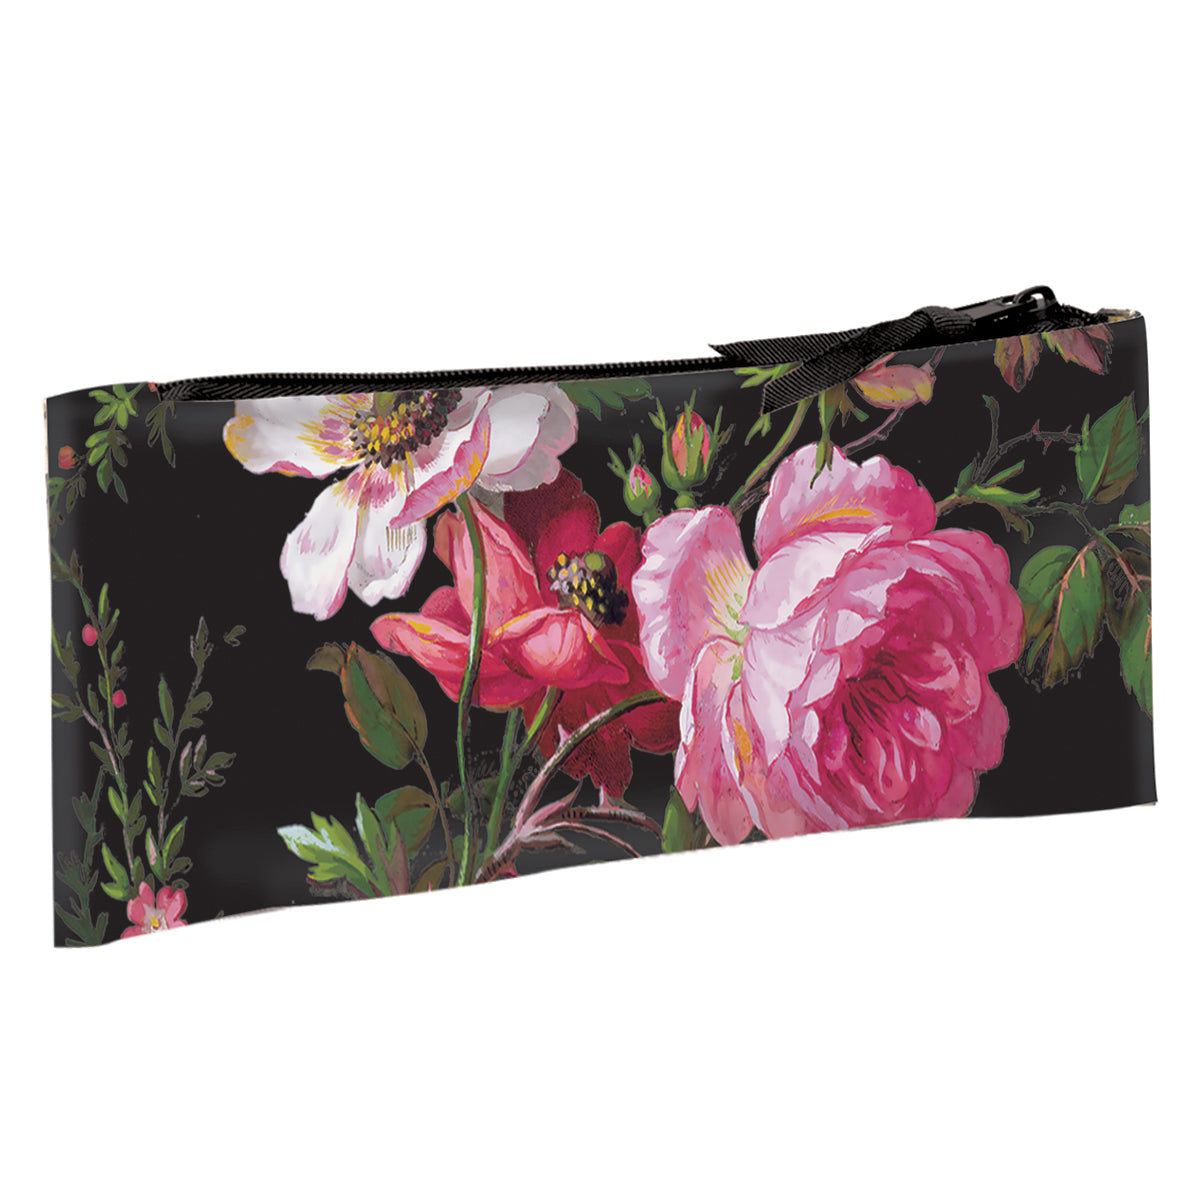 a black floral bag with pink flowers on it.